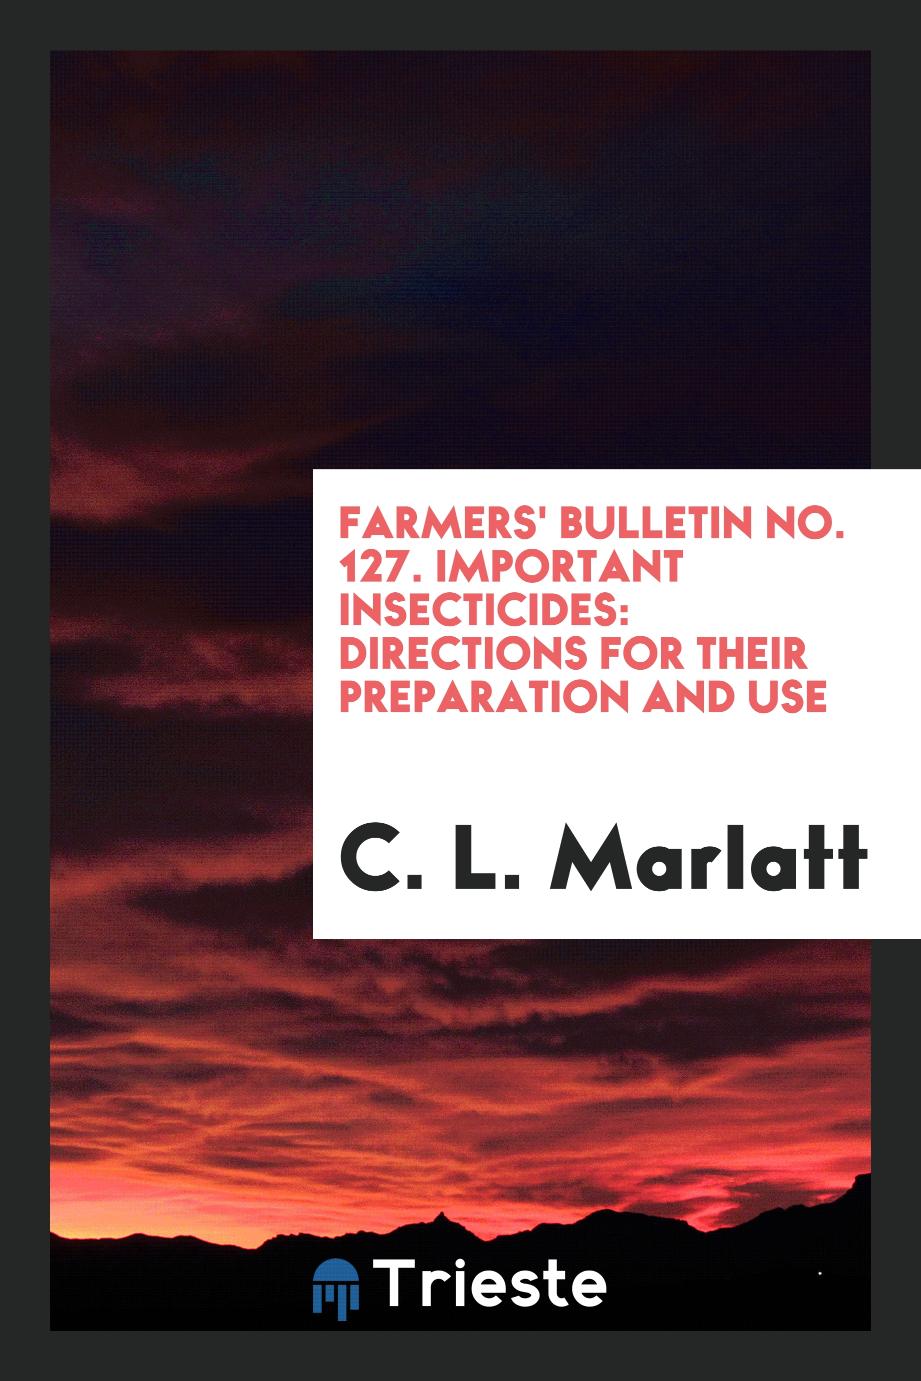 C. L. Marlatt - Farmers' Bulletin No. 127. Important insecticides: directions for their preparation and use